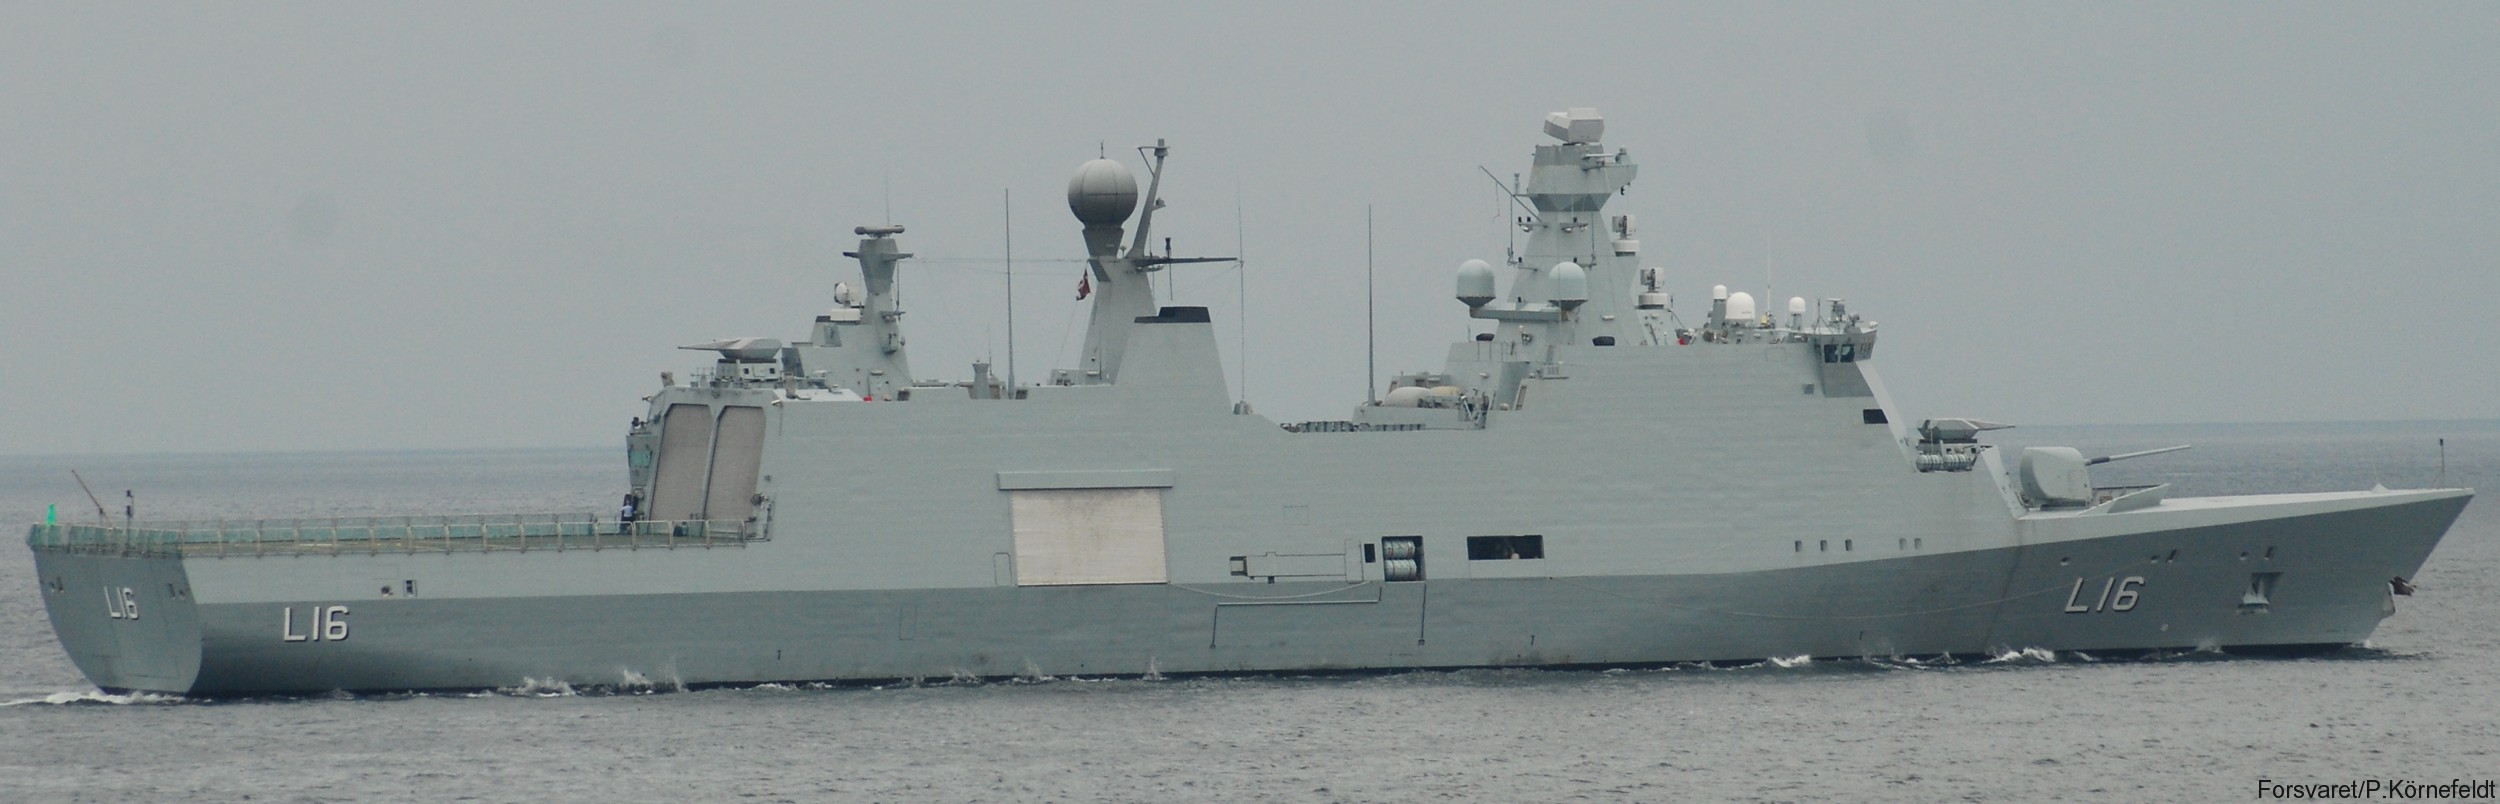 l-16 hdms absalon command support ship frigate royal danish navy 42